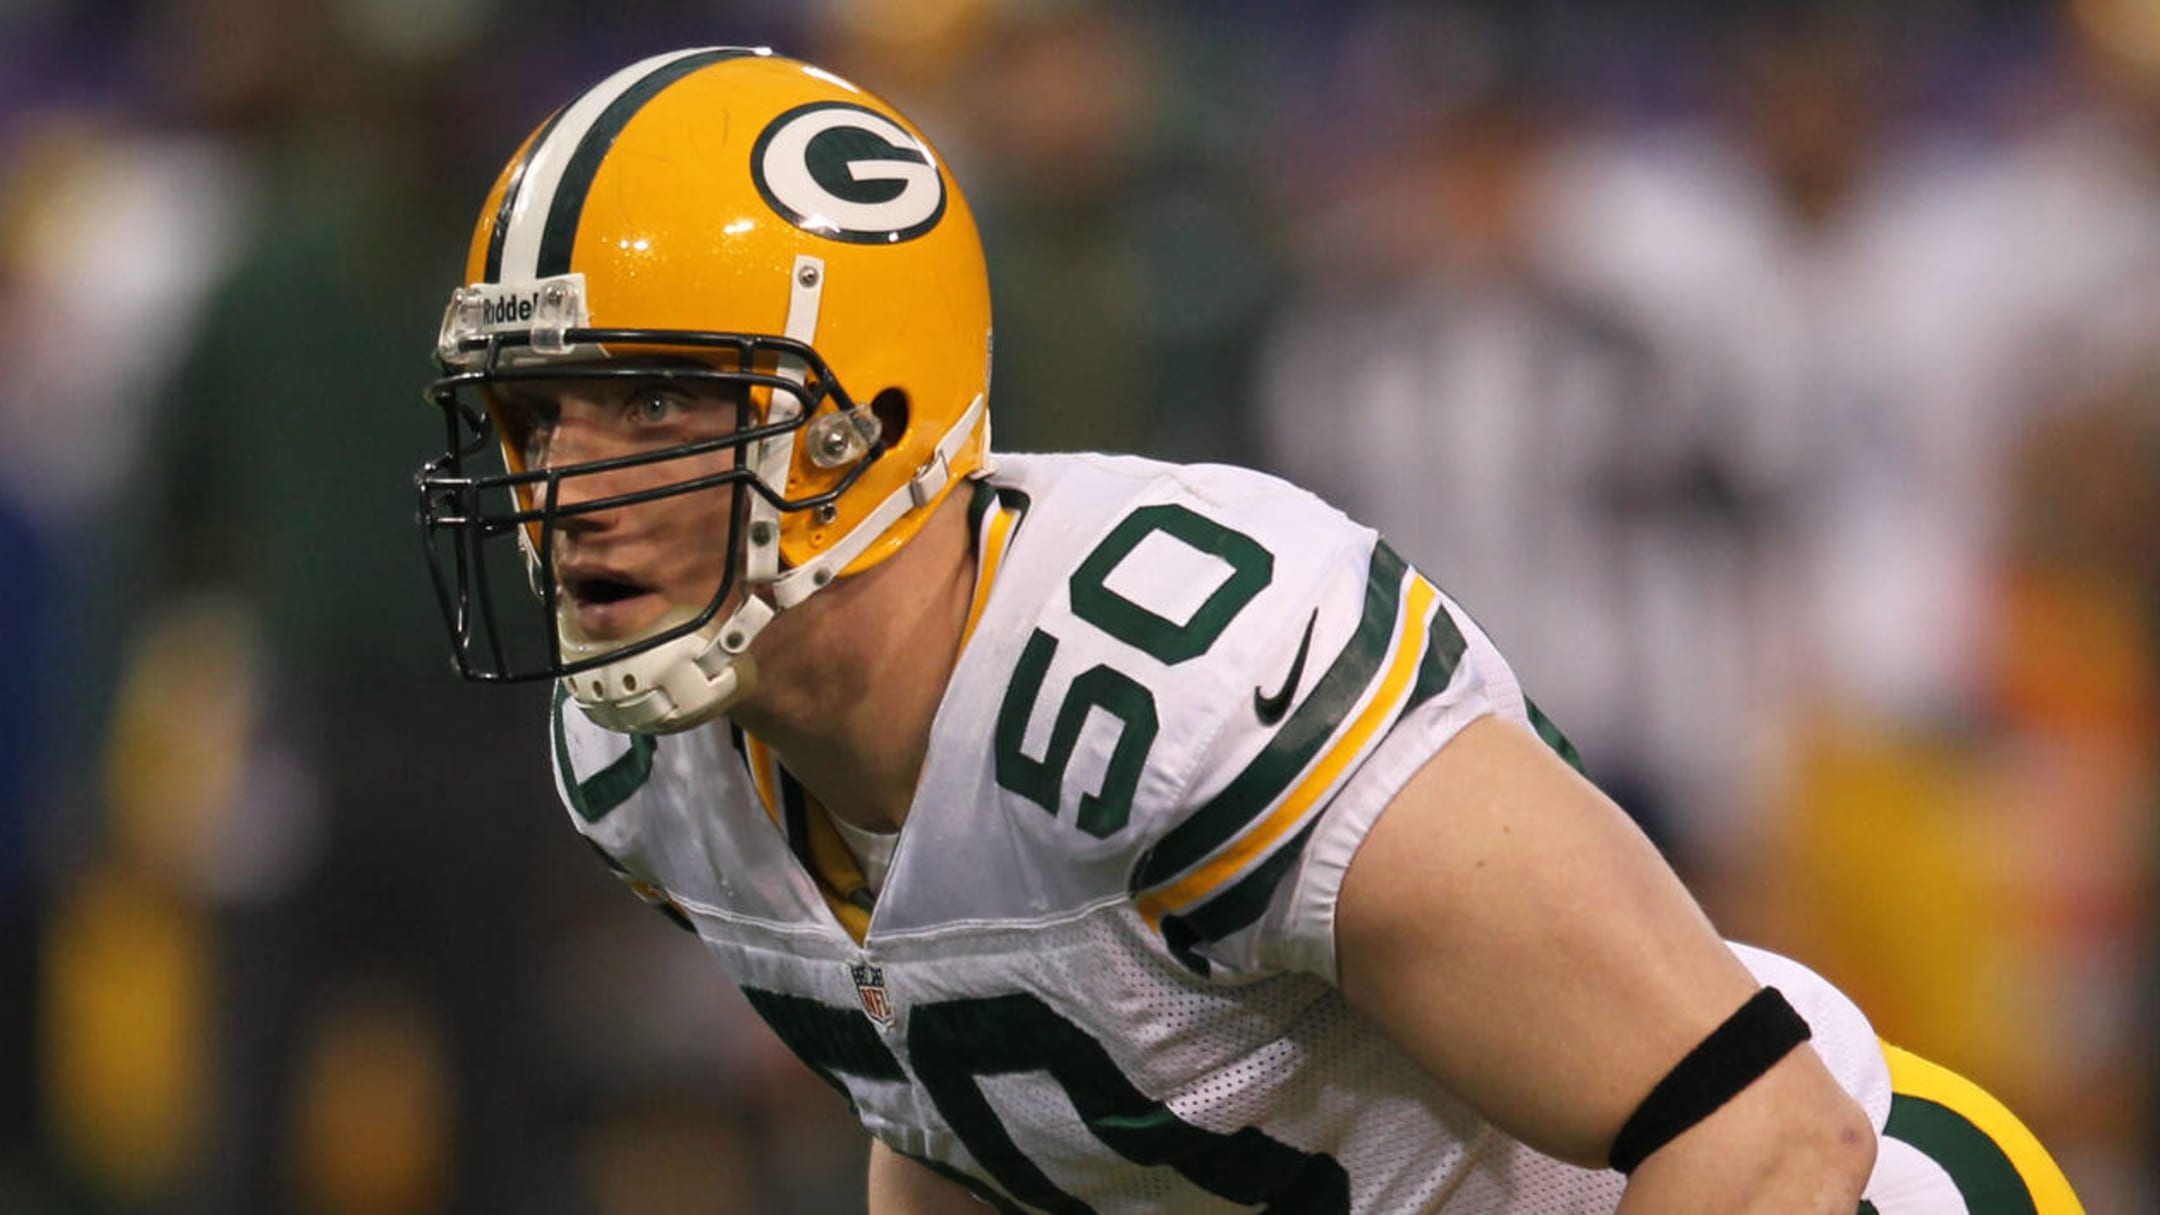 Why A.J. Hawk will be in the Packers Hall of Fame